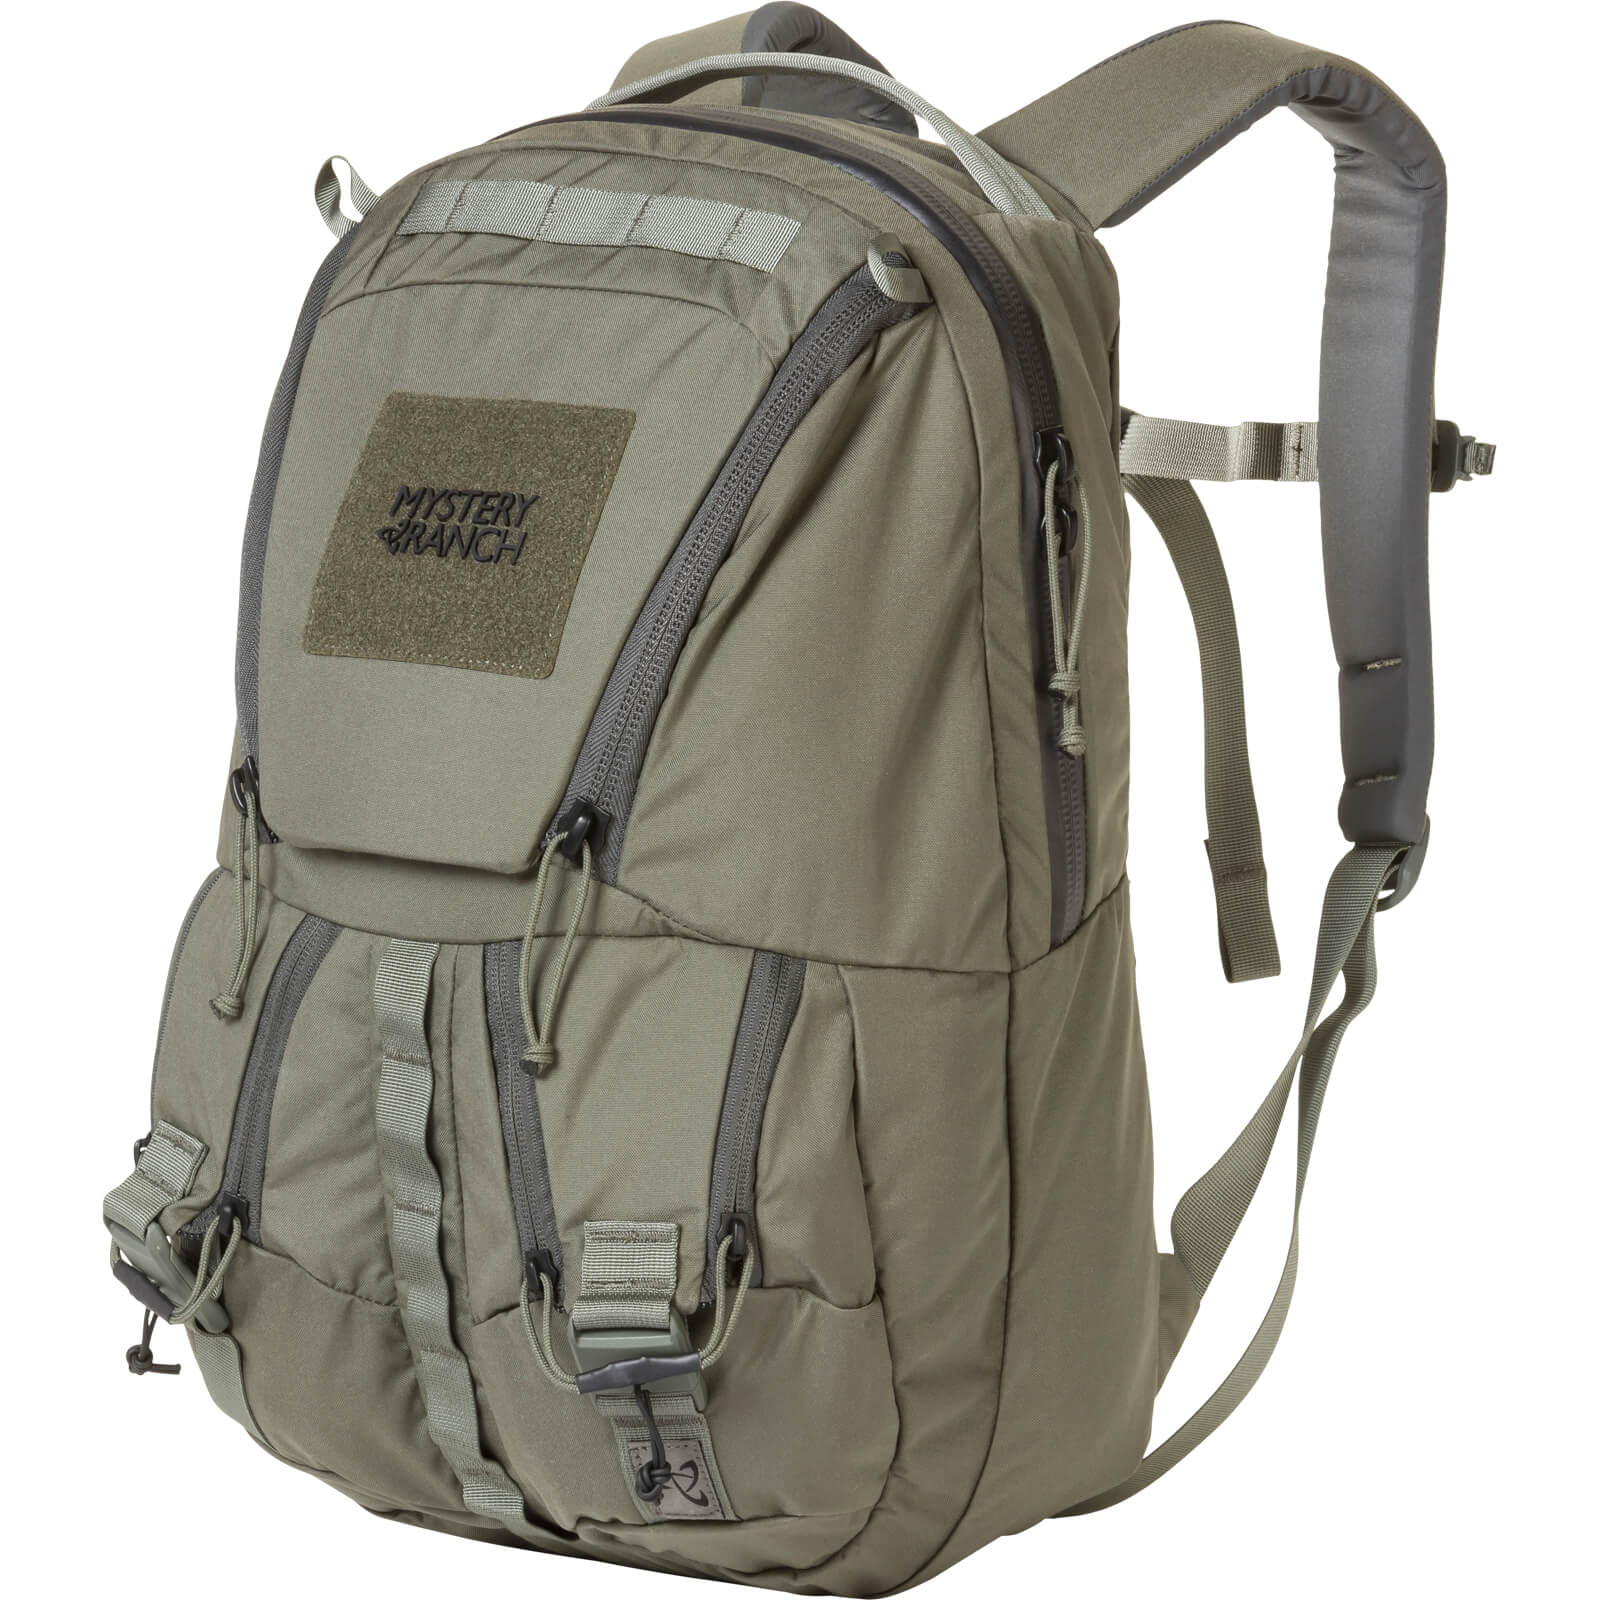 Rip Ruck 24 Pack | MYSTERY RANCH Backpacks